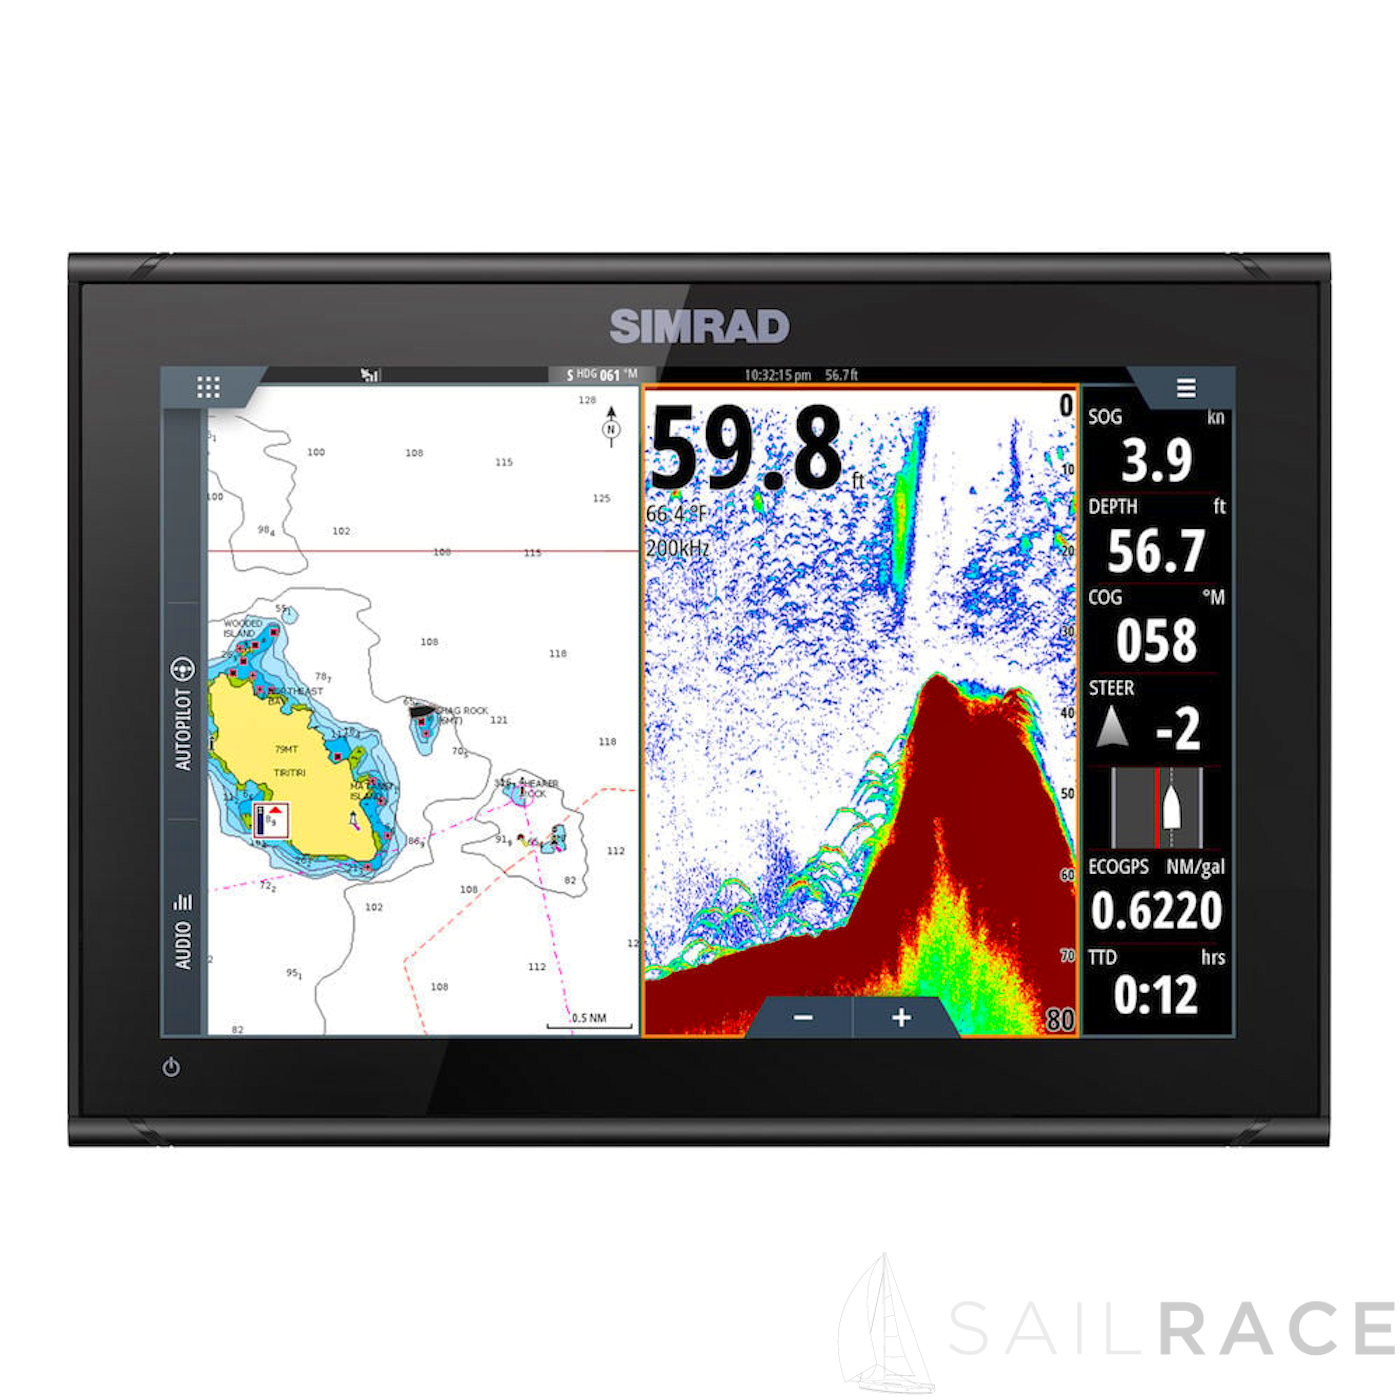 Simrad 12-inch chartplotter and radar display with TotalScan™ transducer - image 2